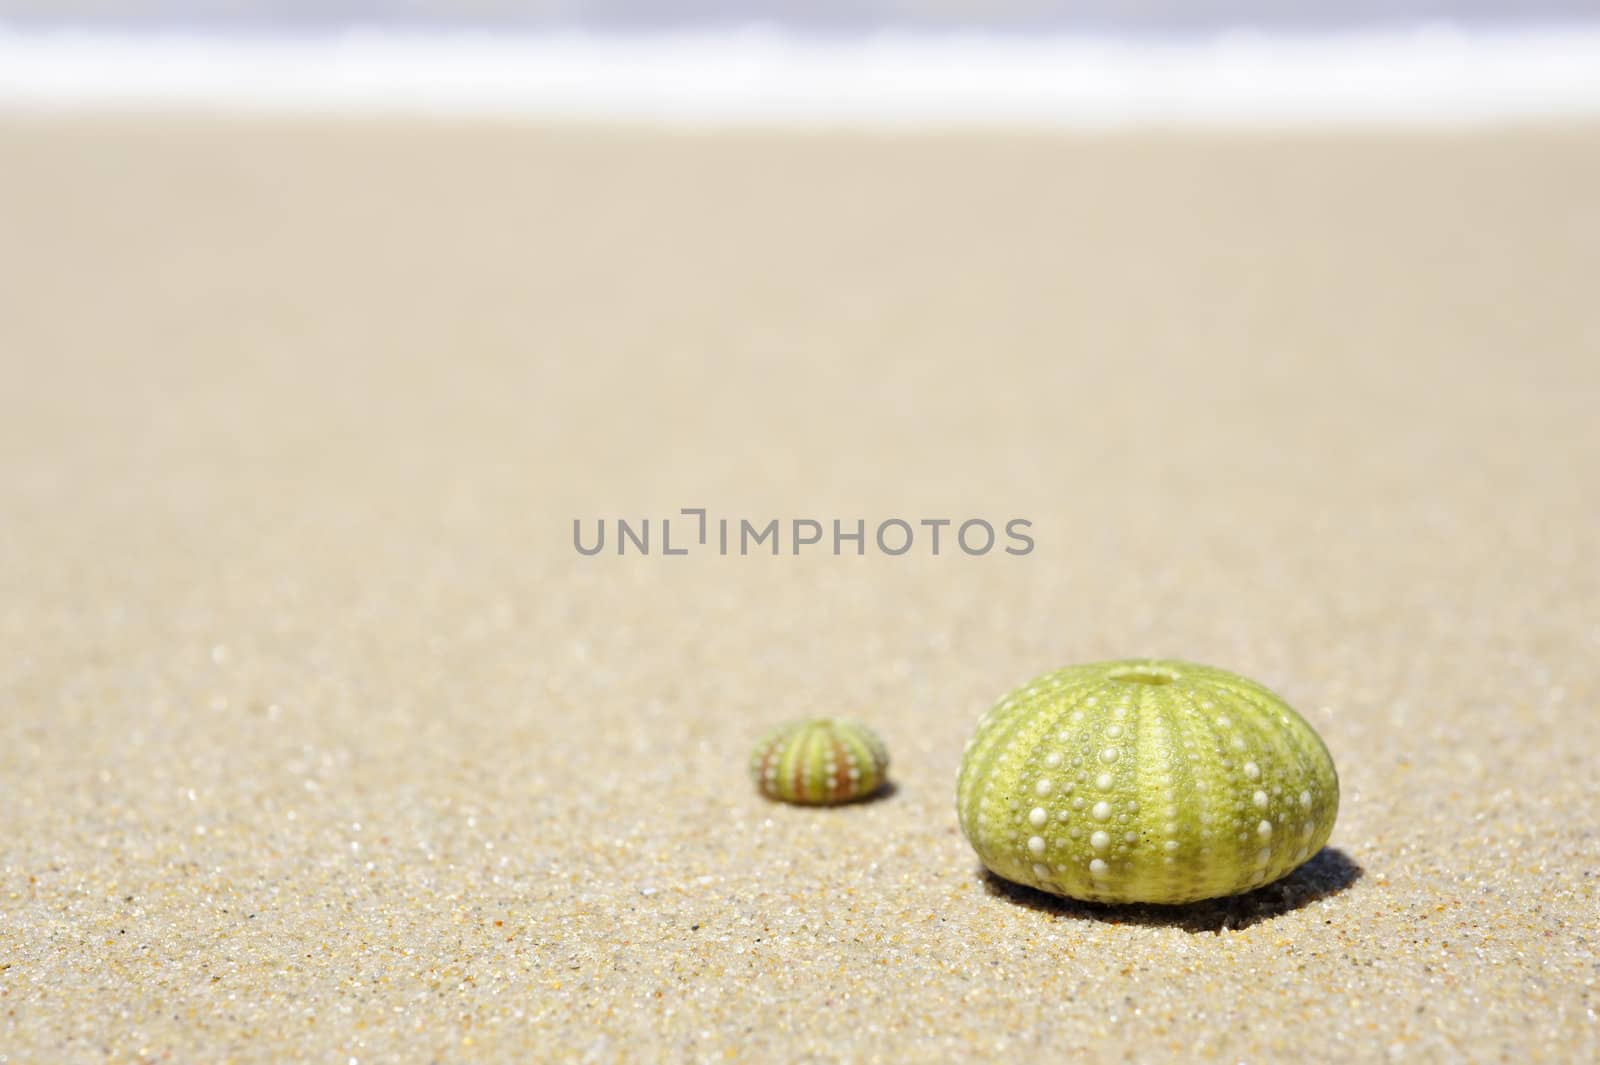 Beach scene with two dead sea urchin shells by tish1